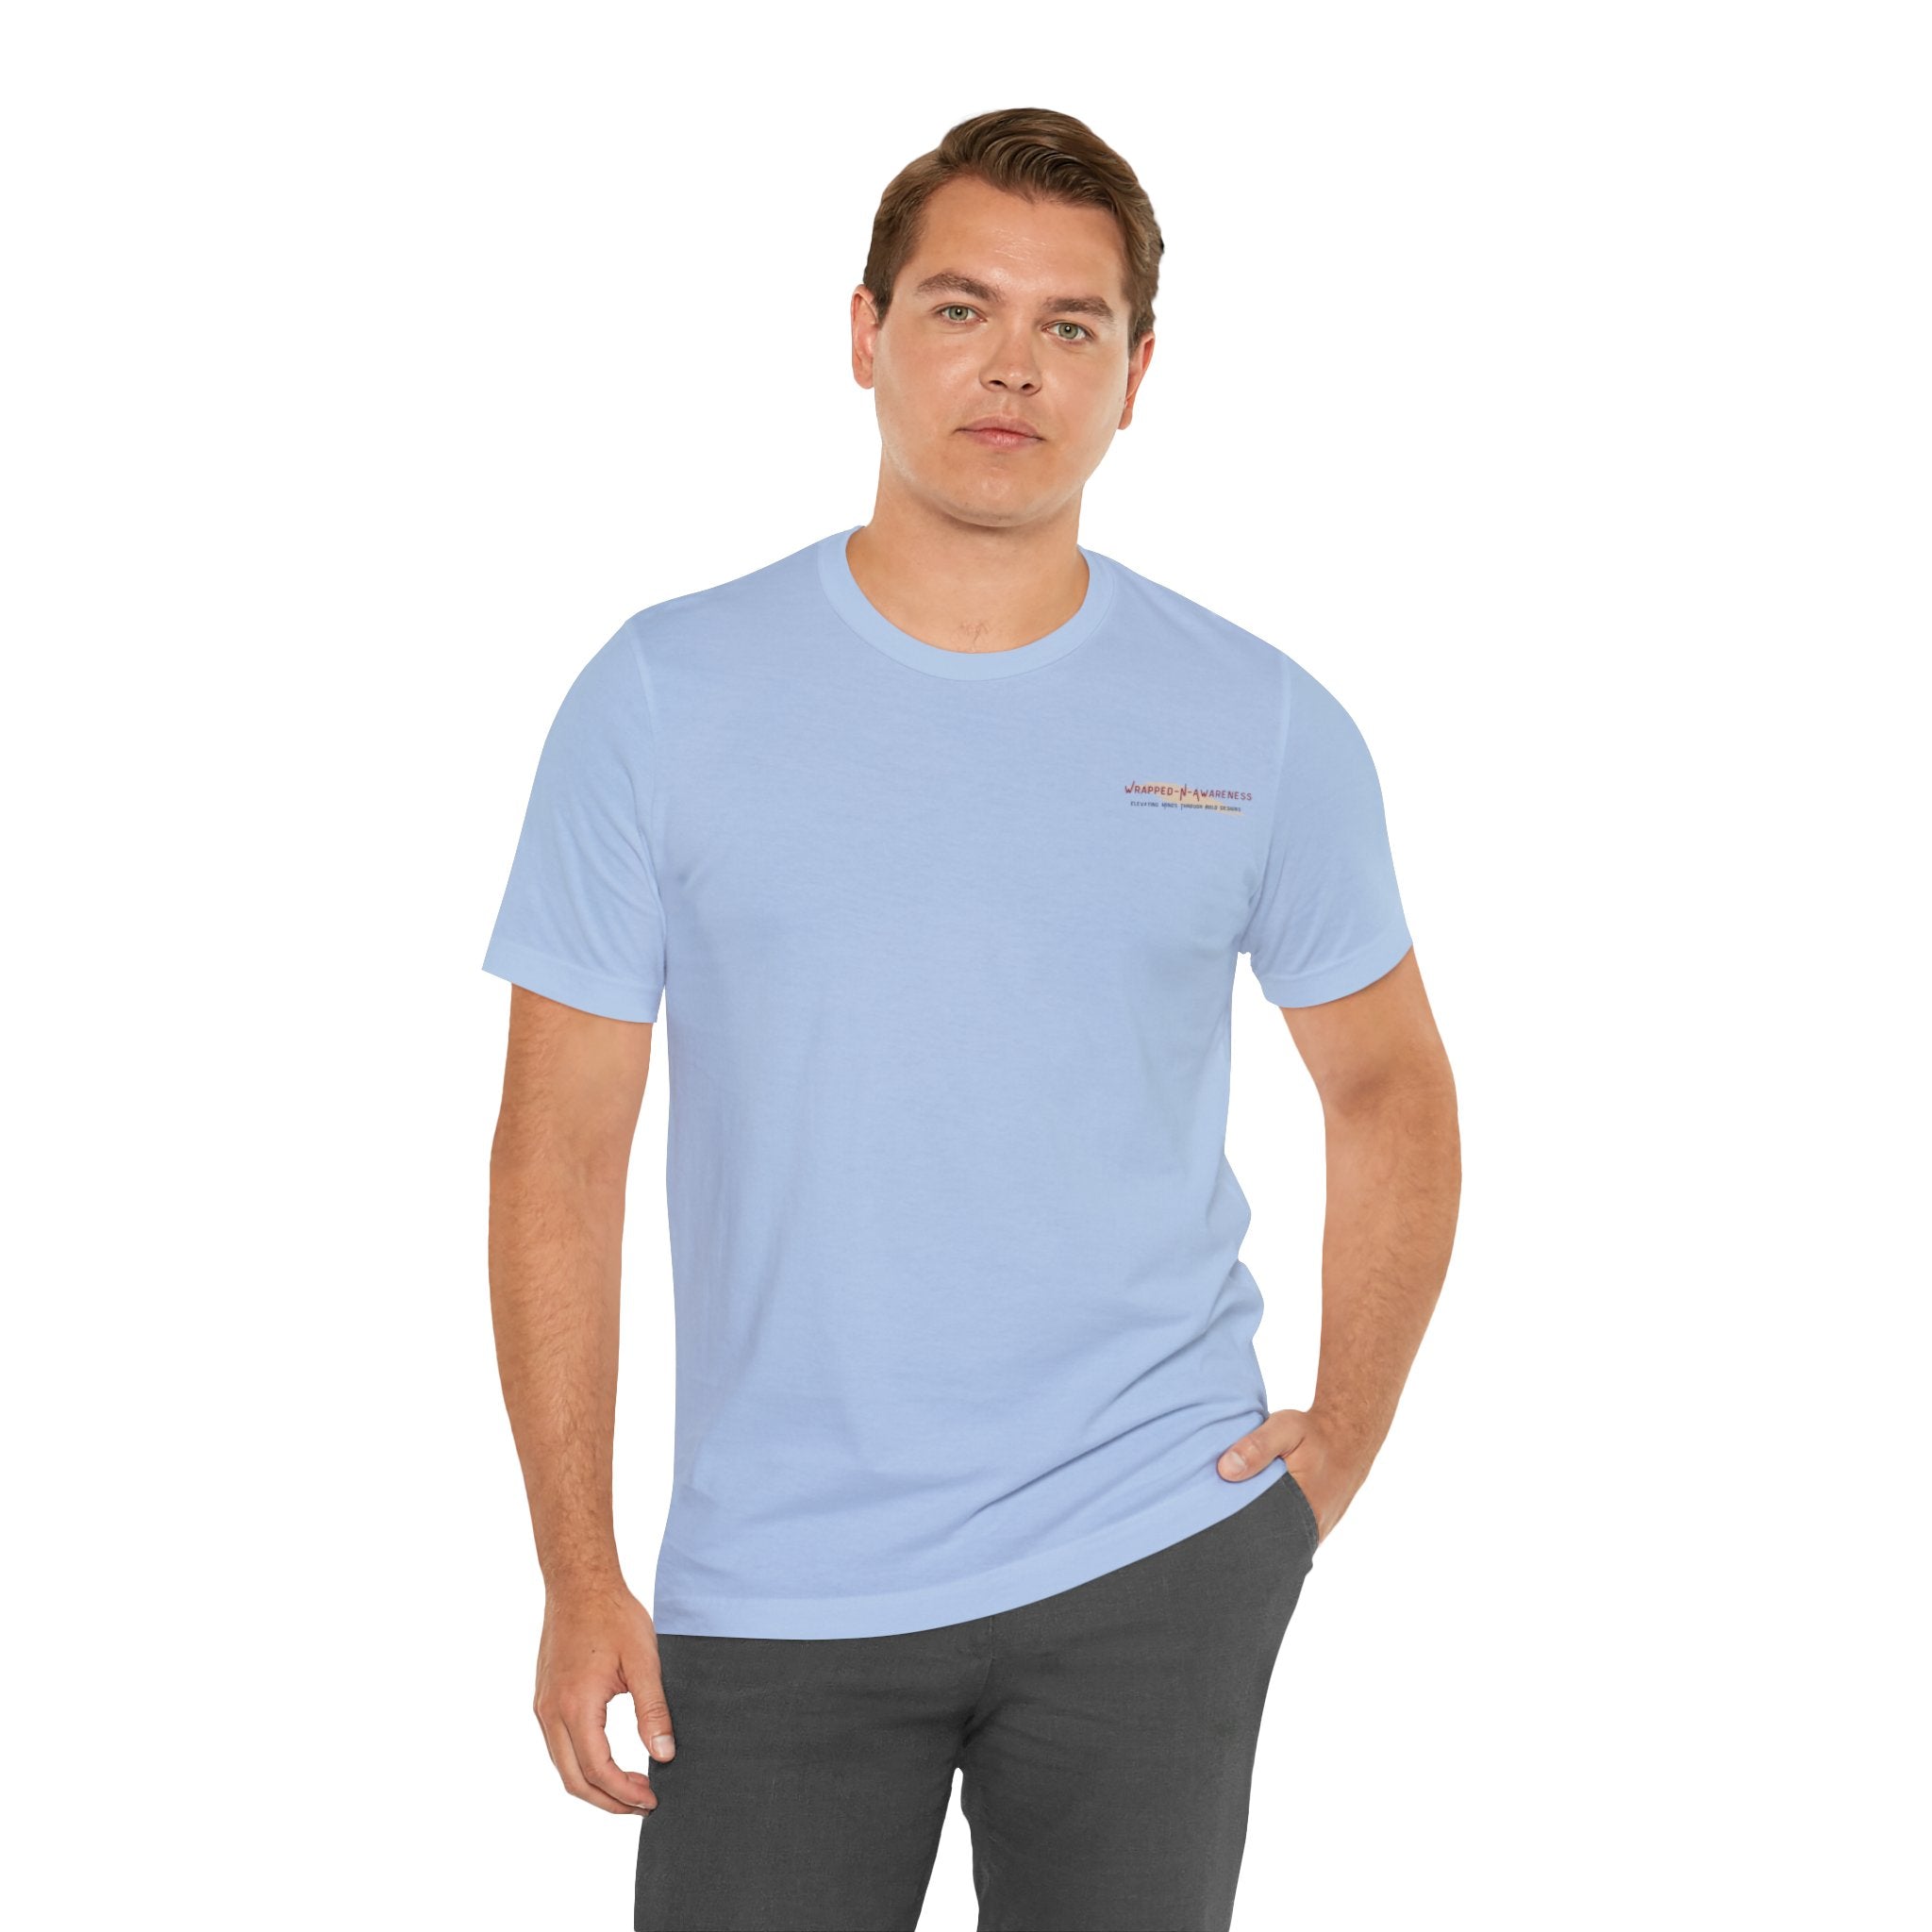 Inspire Growth Jersey Tee - Bella+Canvas 3001 Turquoise Airlume Cotton Bella+Canvas 3001 Crew Neckline Jersey Short Sleeve Lightweight Fabric Mental Health Support Retail Fit Tear-away Label Tee Unisex Tee T-Shirt 5303777842963405677_2048 Printify